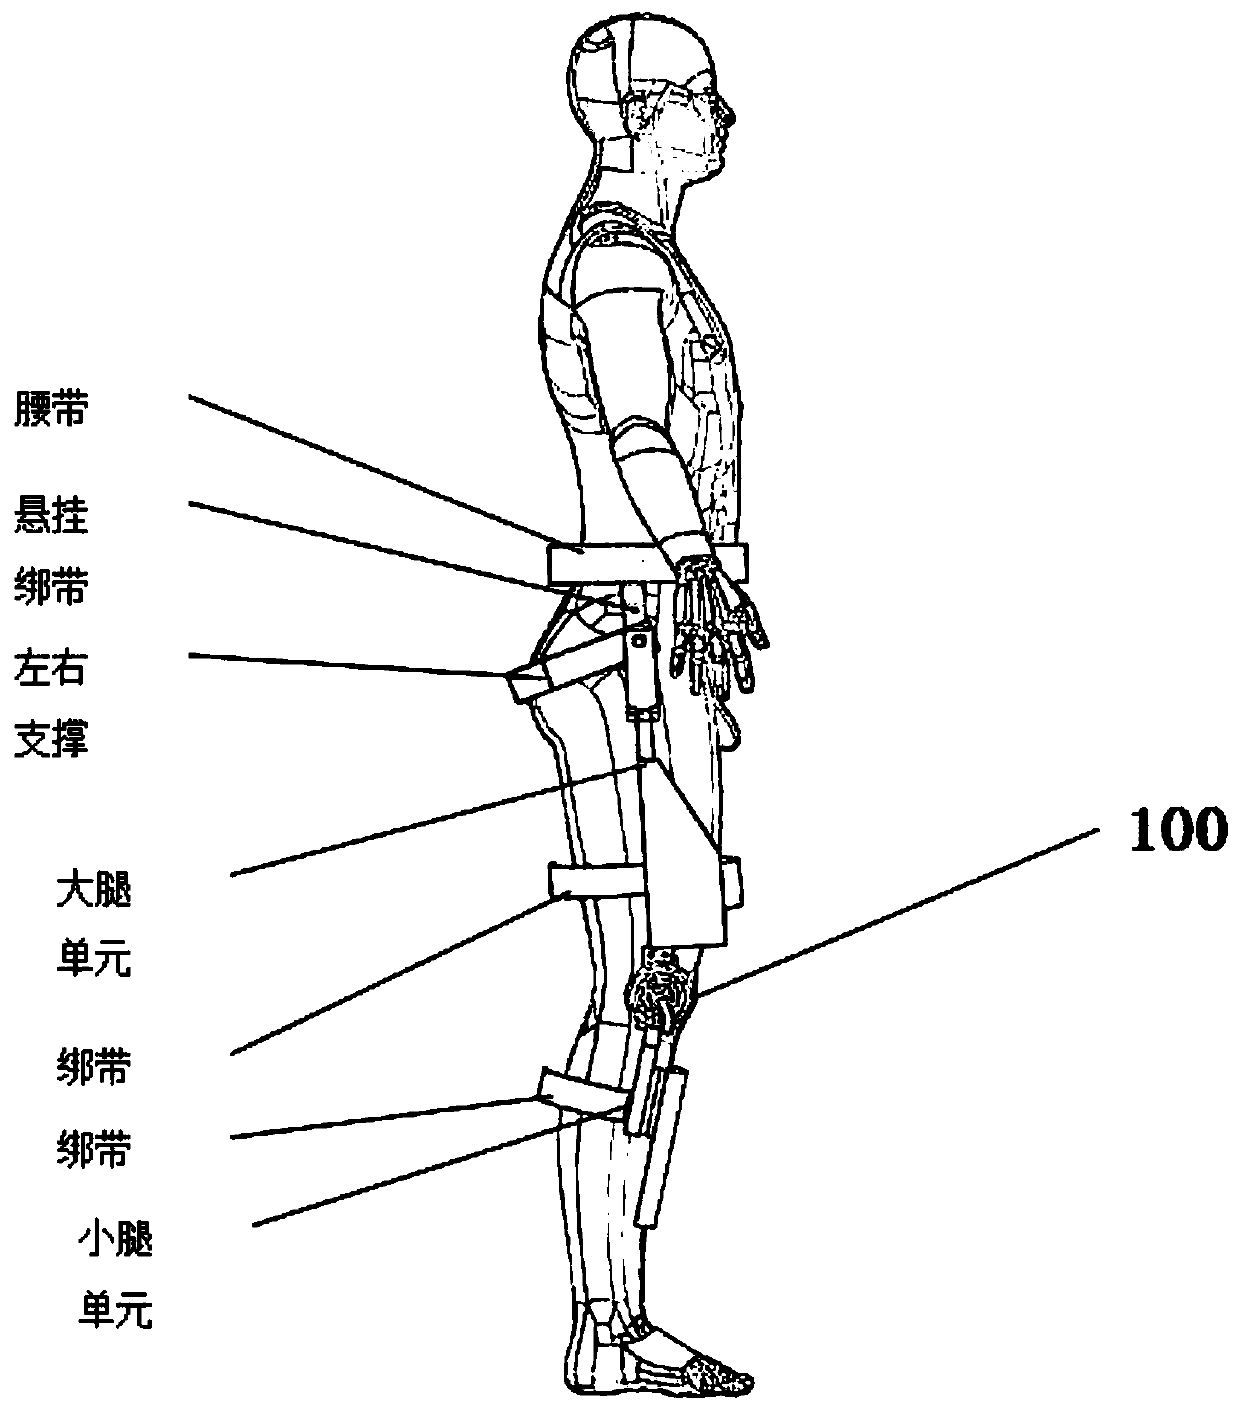 Flexible exoskeleton joint actuator capable of being clutched